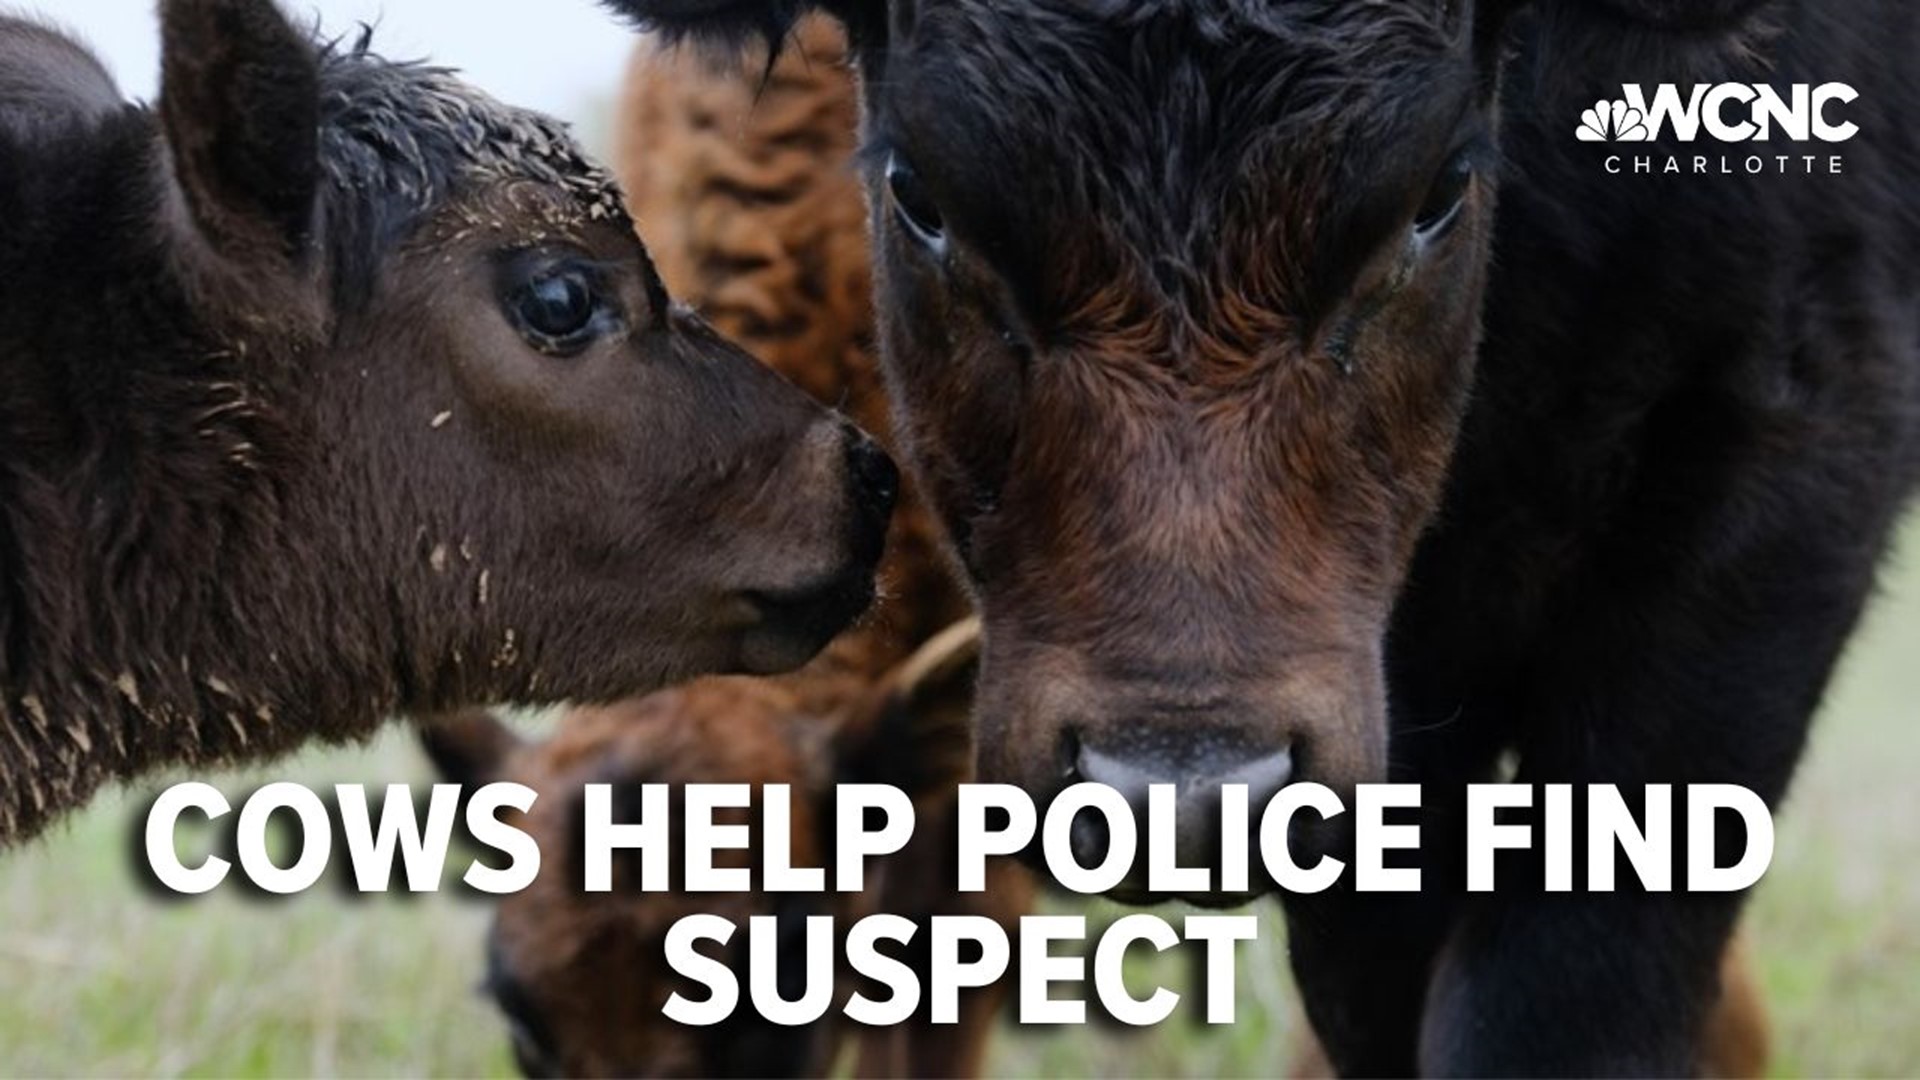 Some cows in Boone pulled off a moving performance this week. Police says the cows helped them find a suspect.